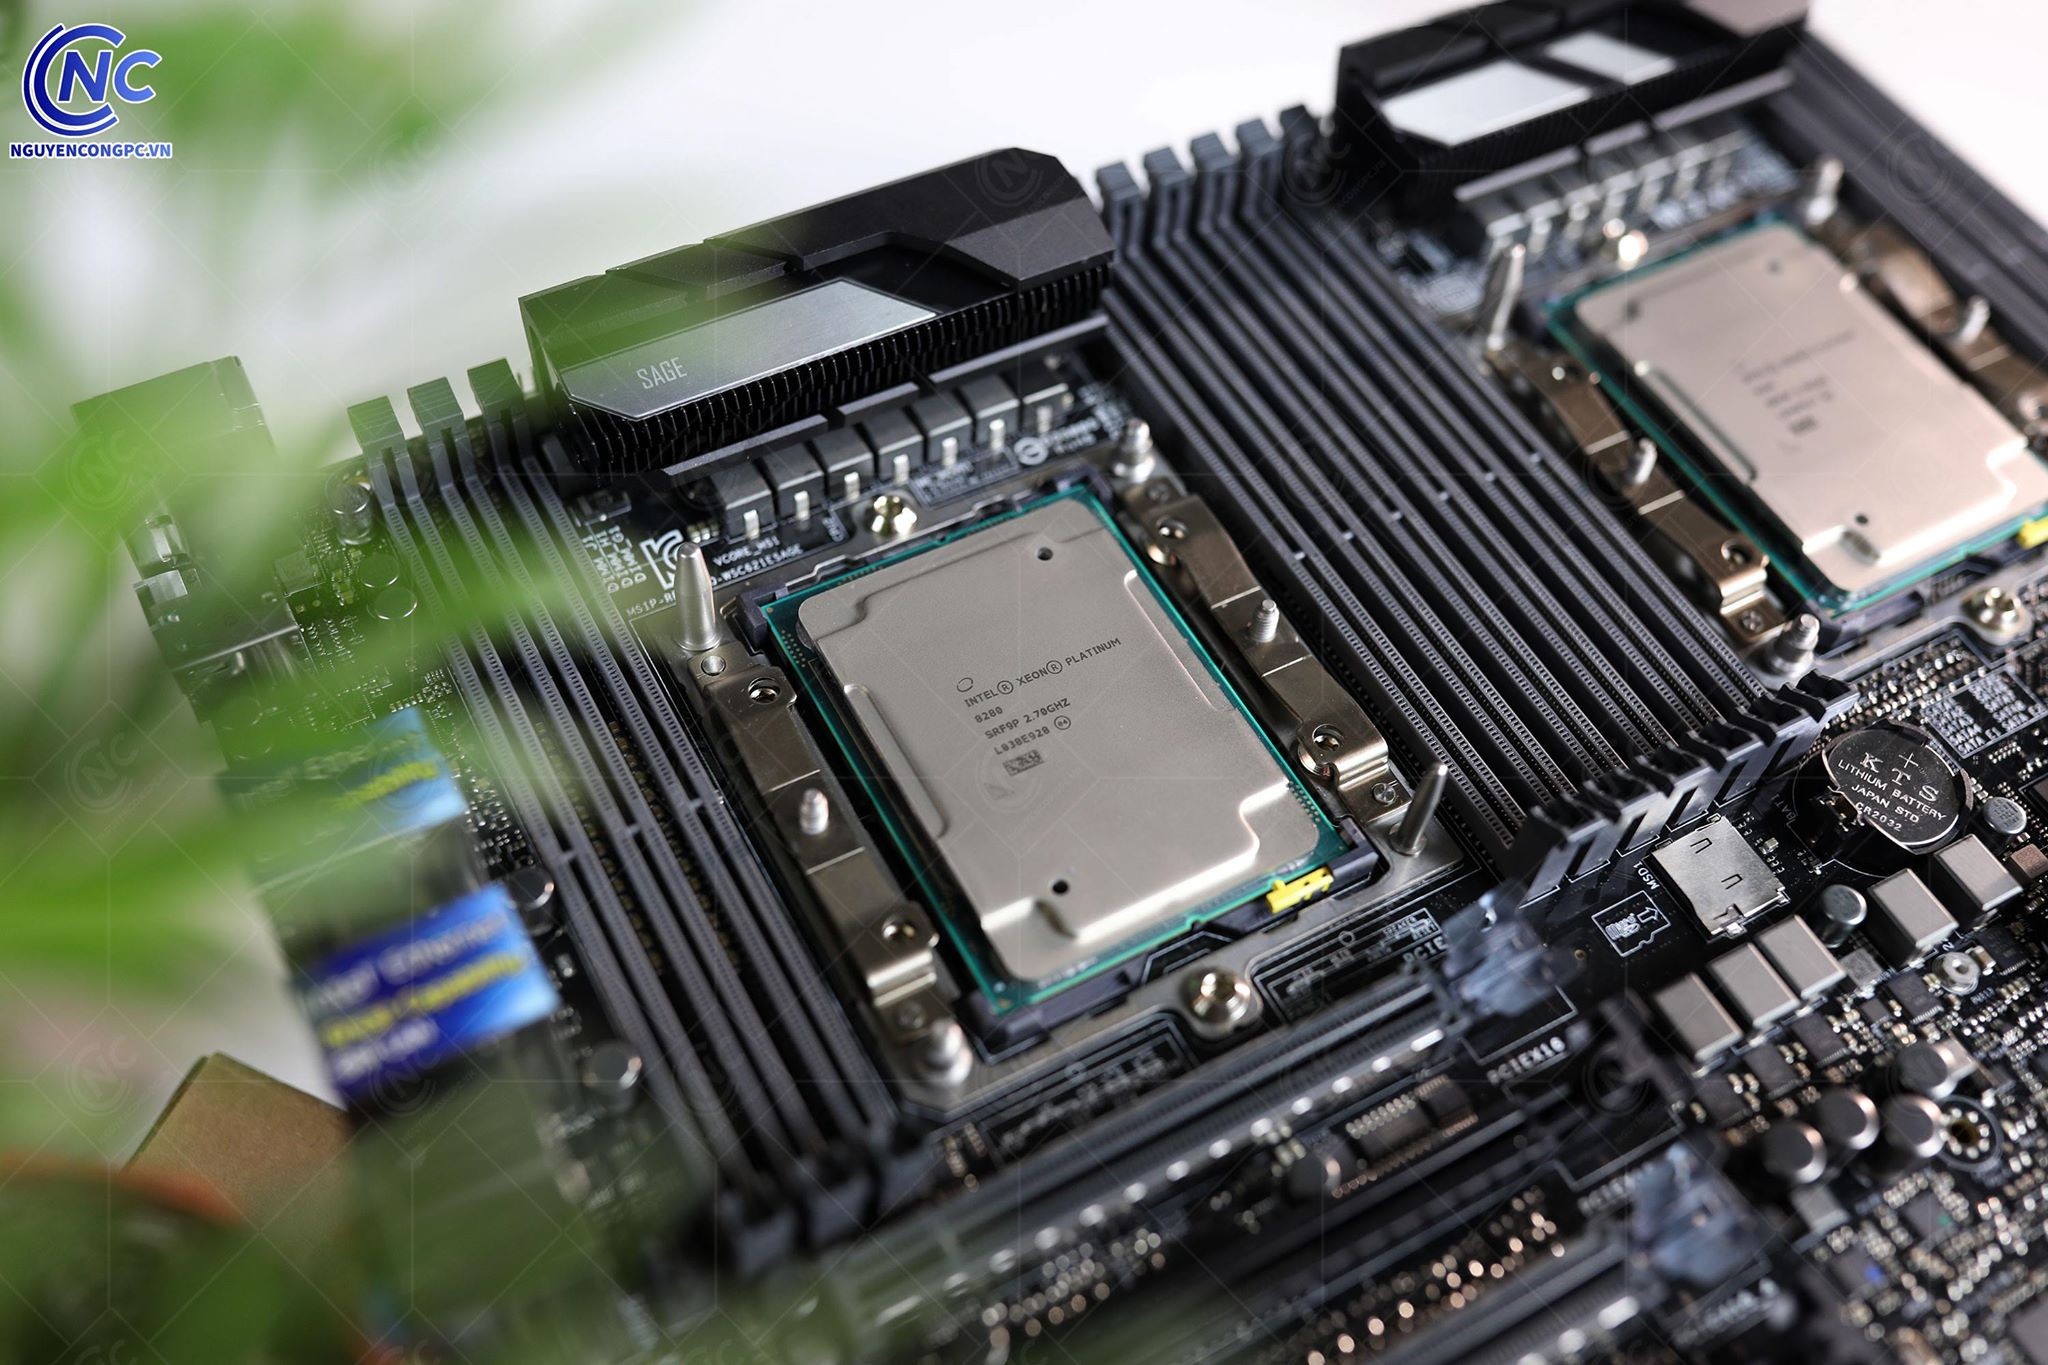 Introducing Intel Xeon Platinum 8280 PROCESSOR CPU with the title of the most powerful Xeon series